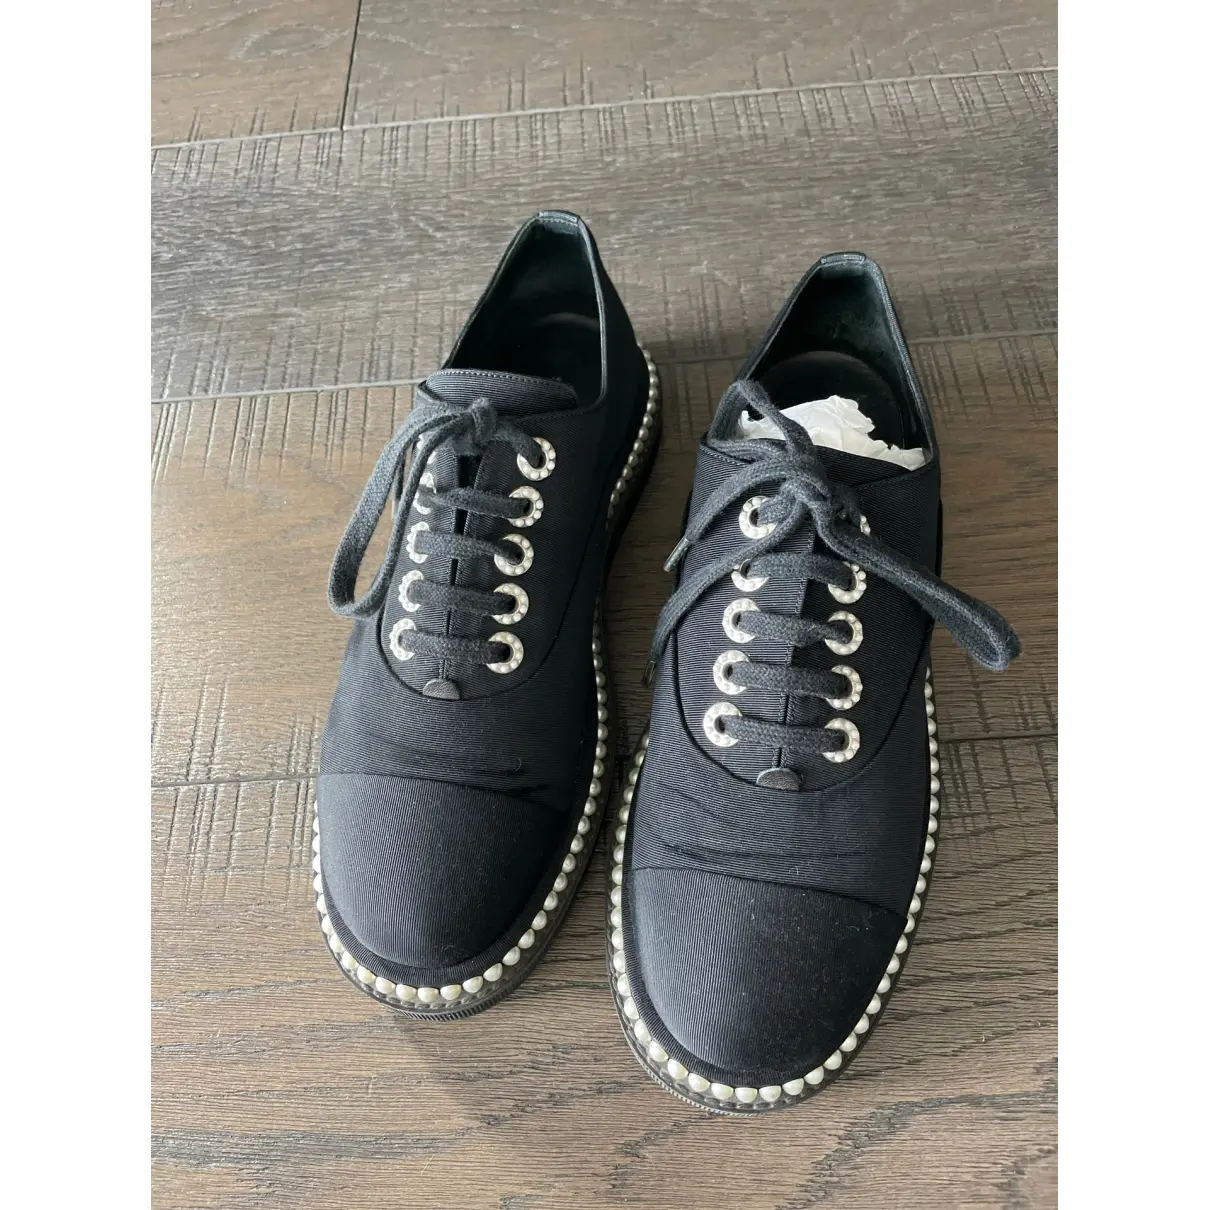 Buy Chanel Cloth lace ups online